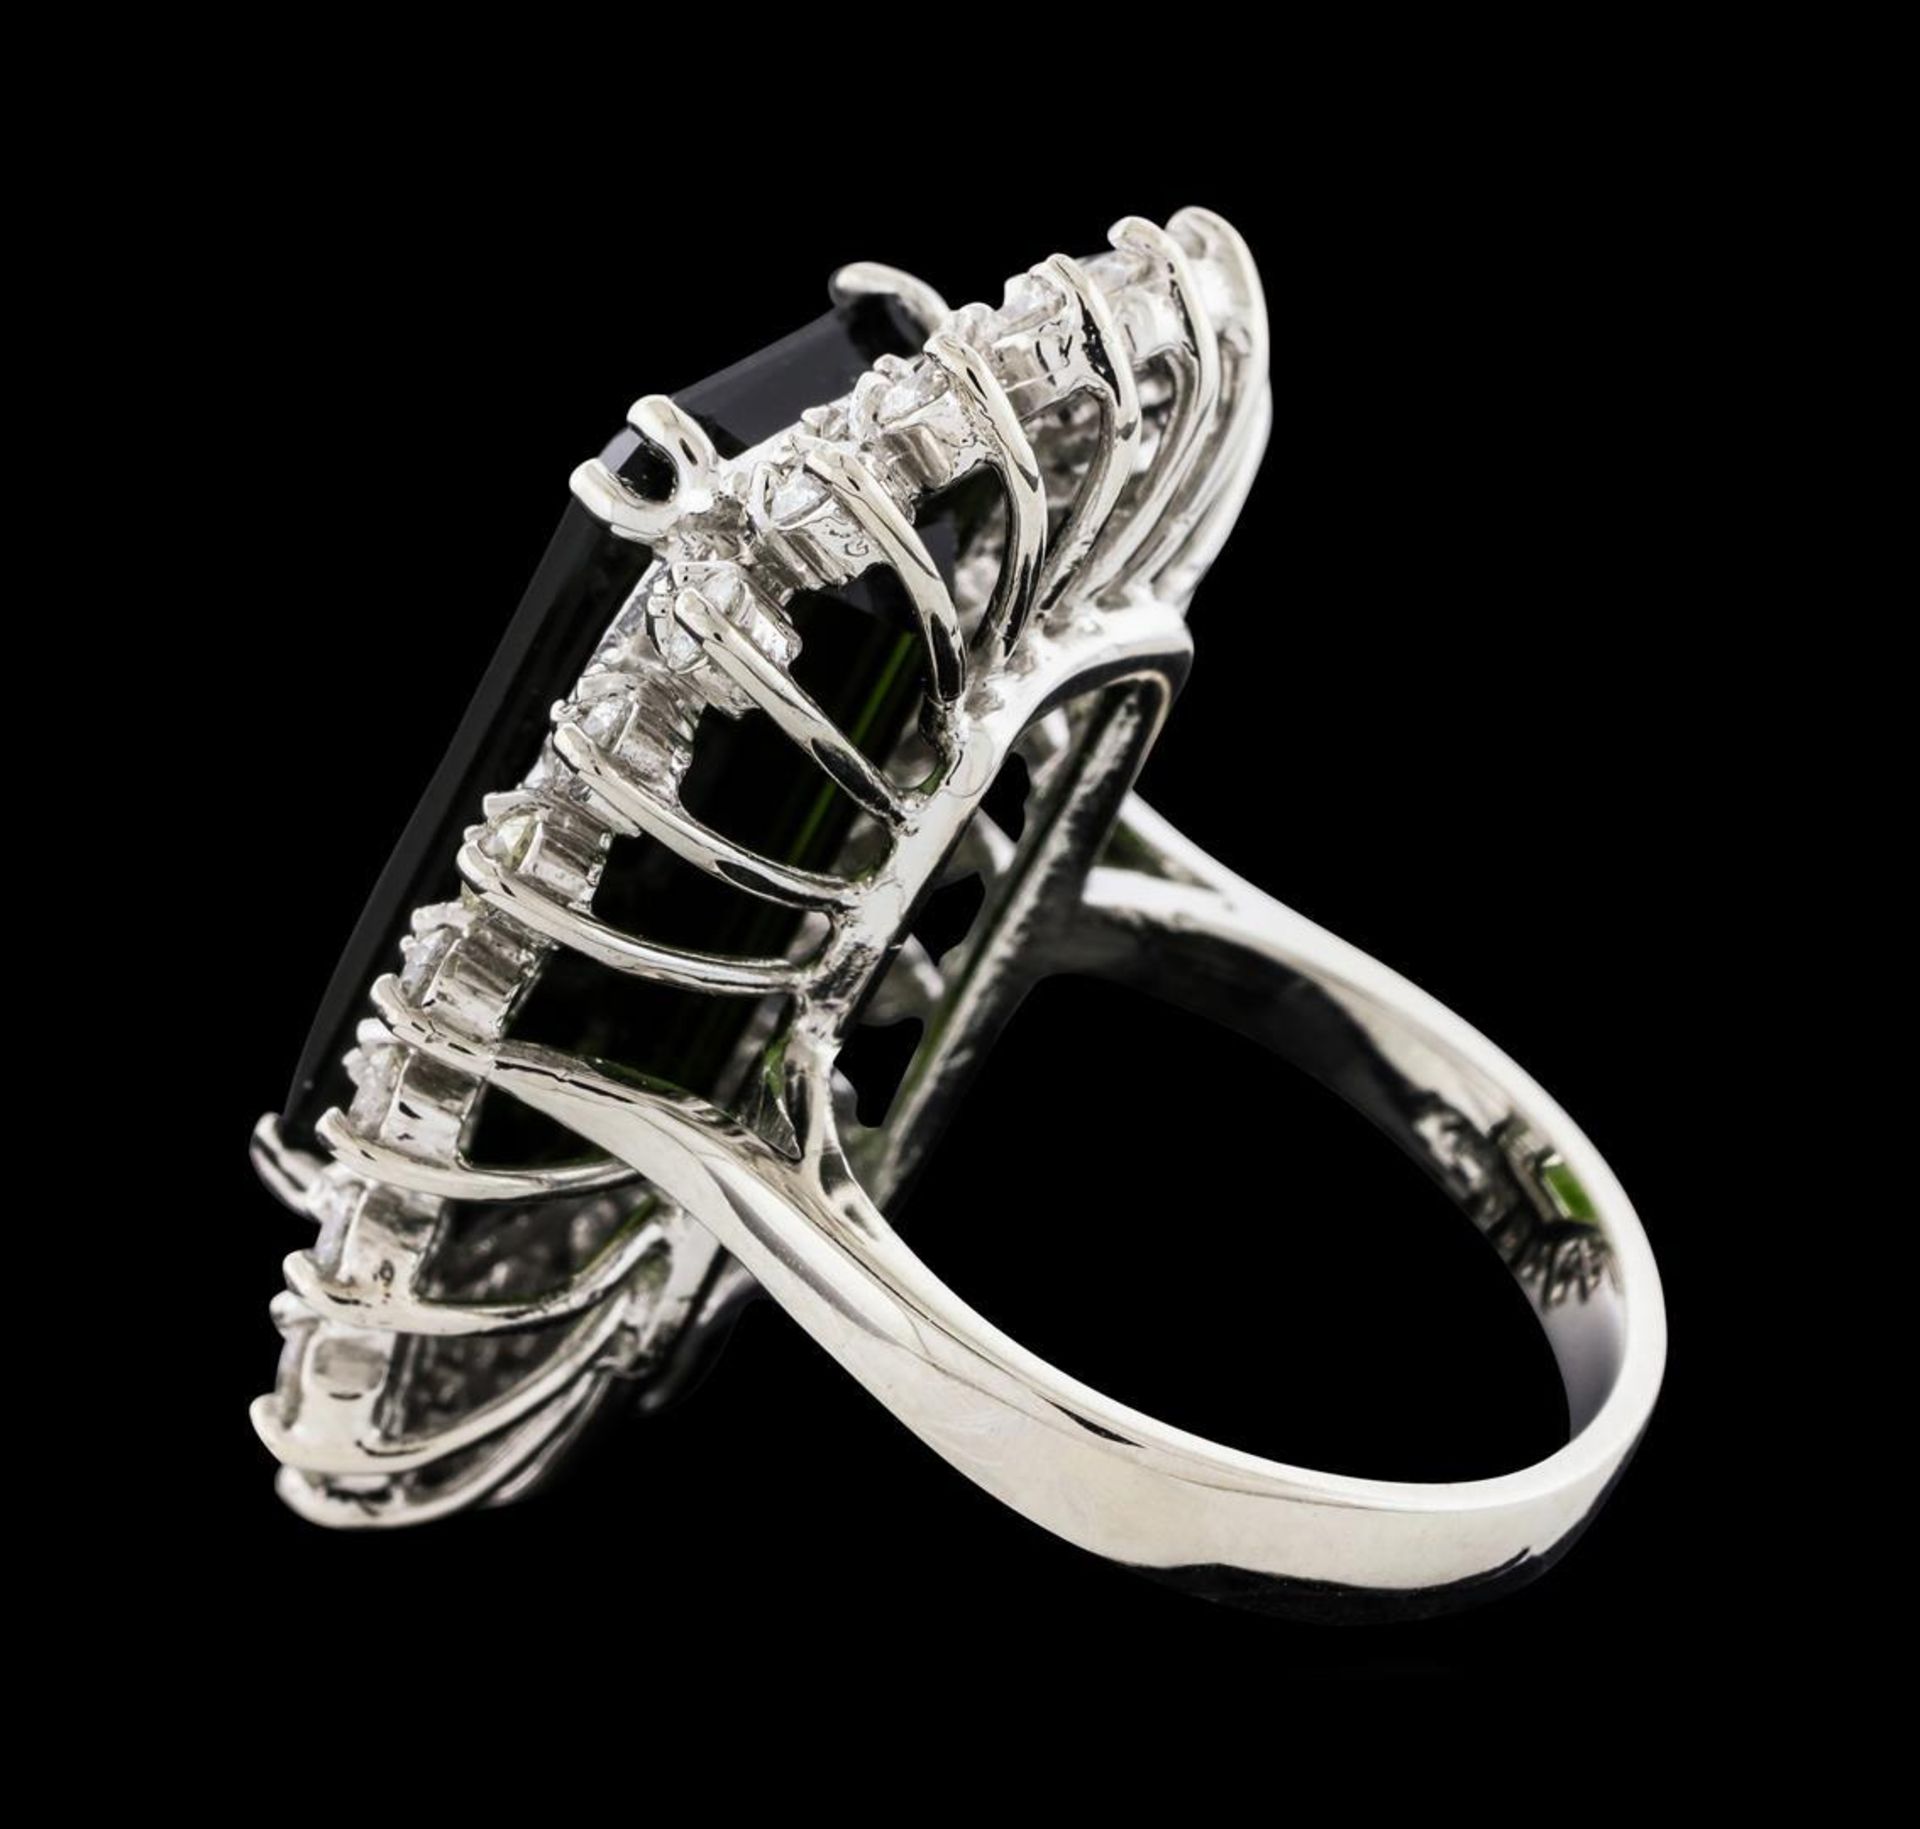 16.67 ctw Tourmaline and Diamond Ring - 14KT White Gold - Image 3 of 5